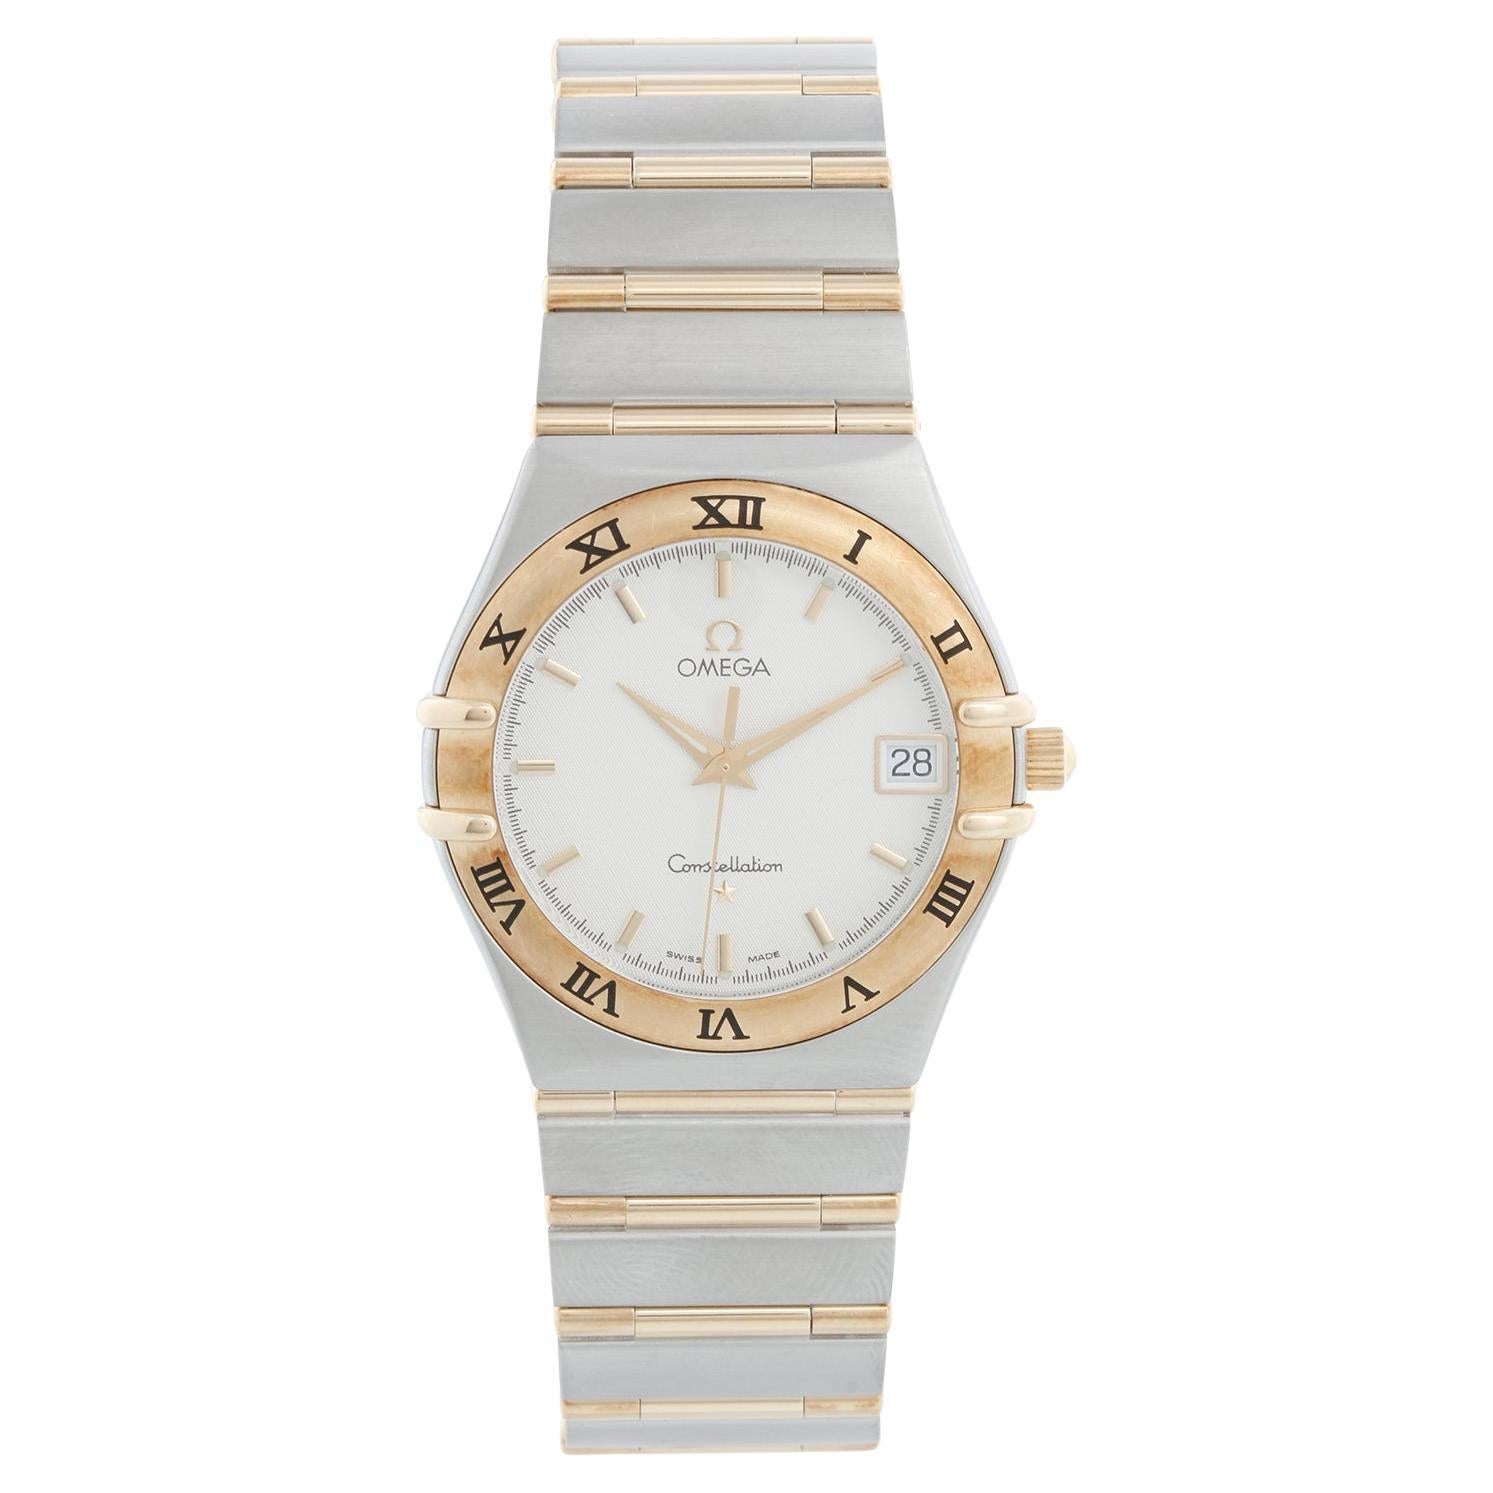 Omega Constellation 2-Toned Men's Watch